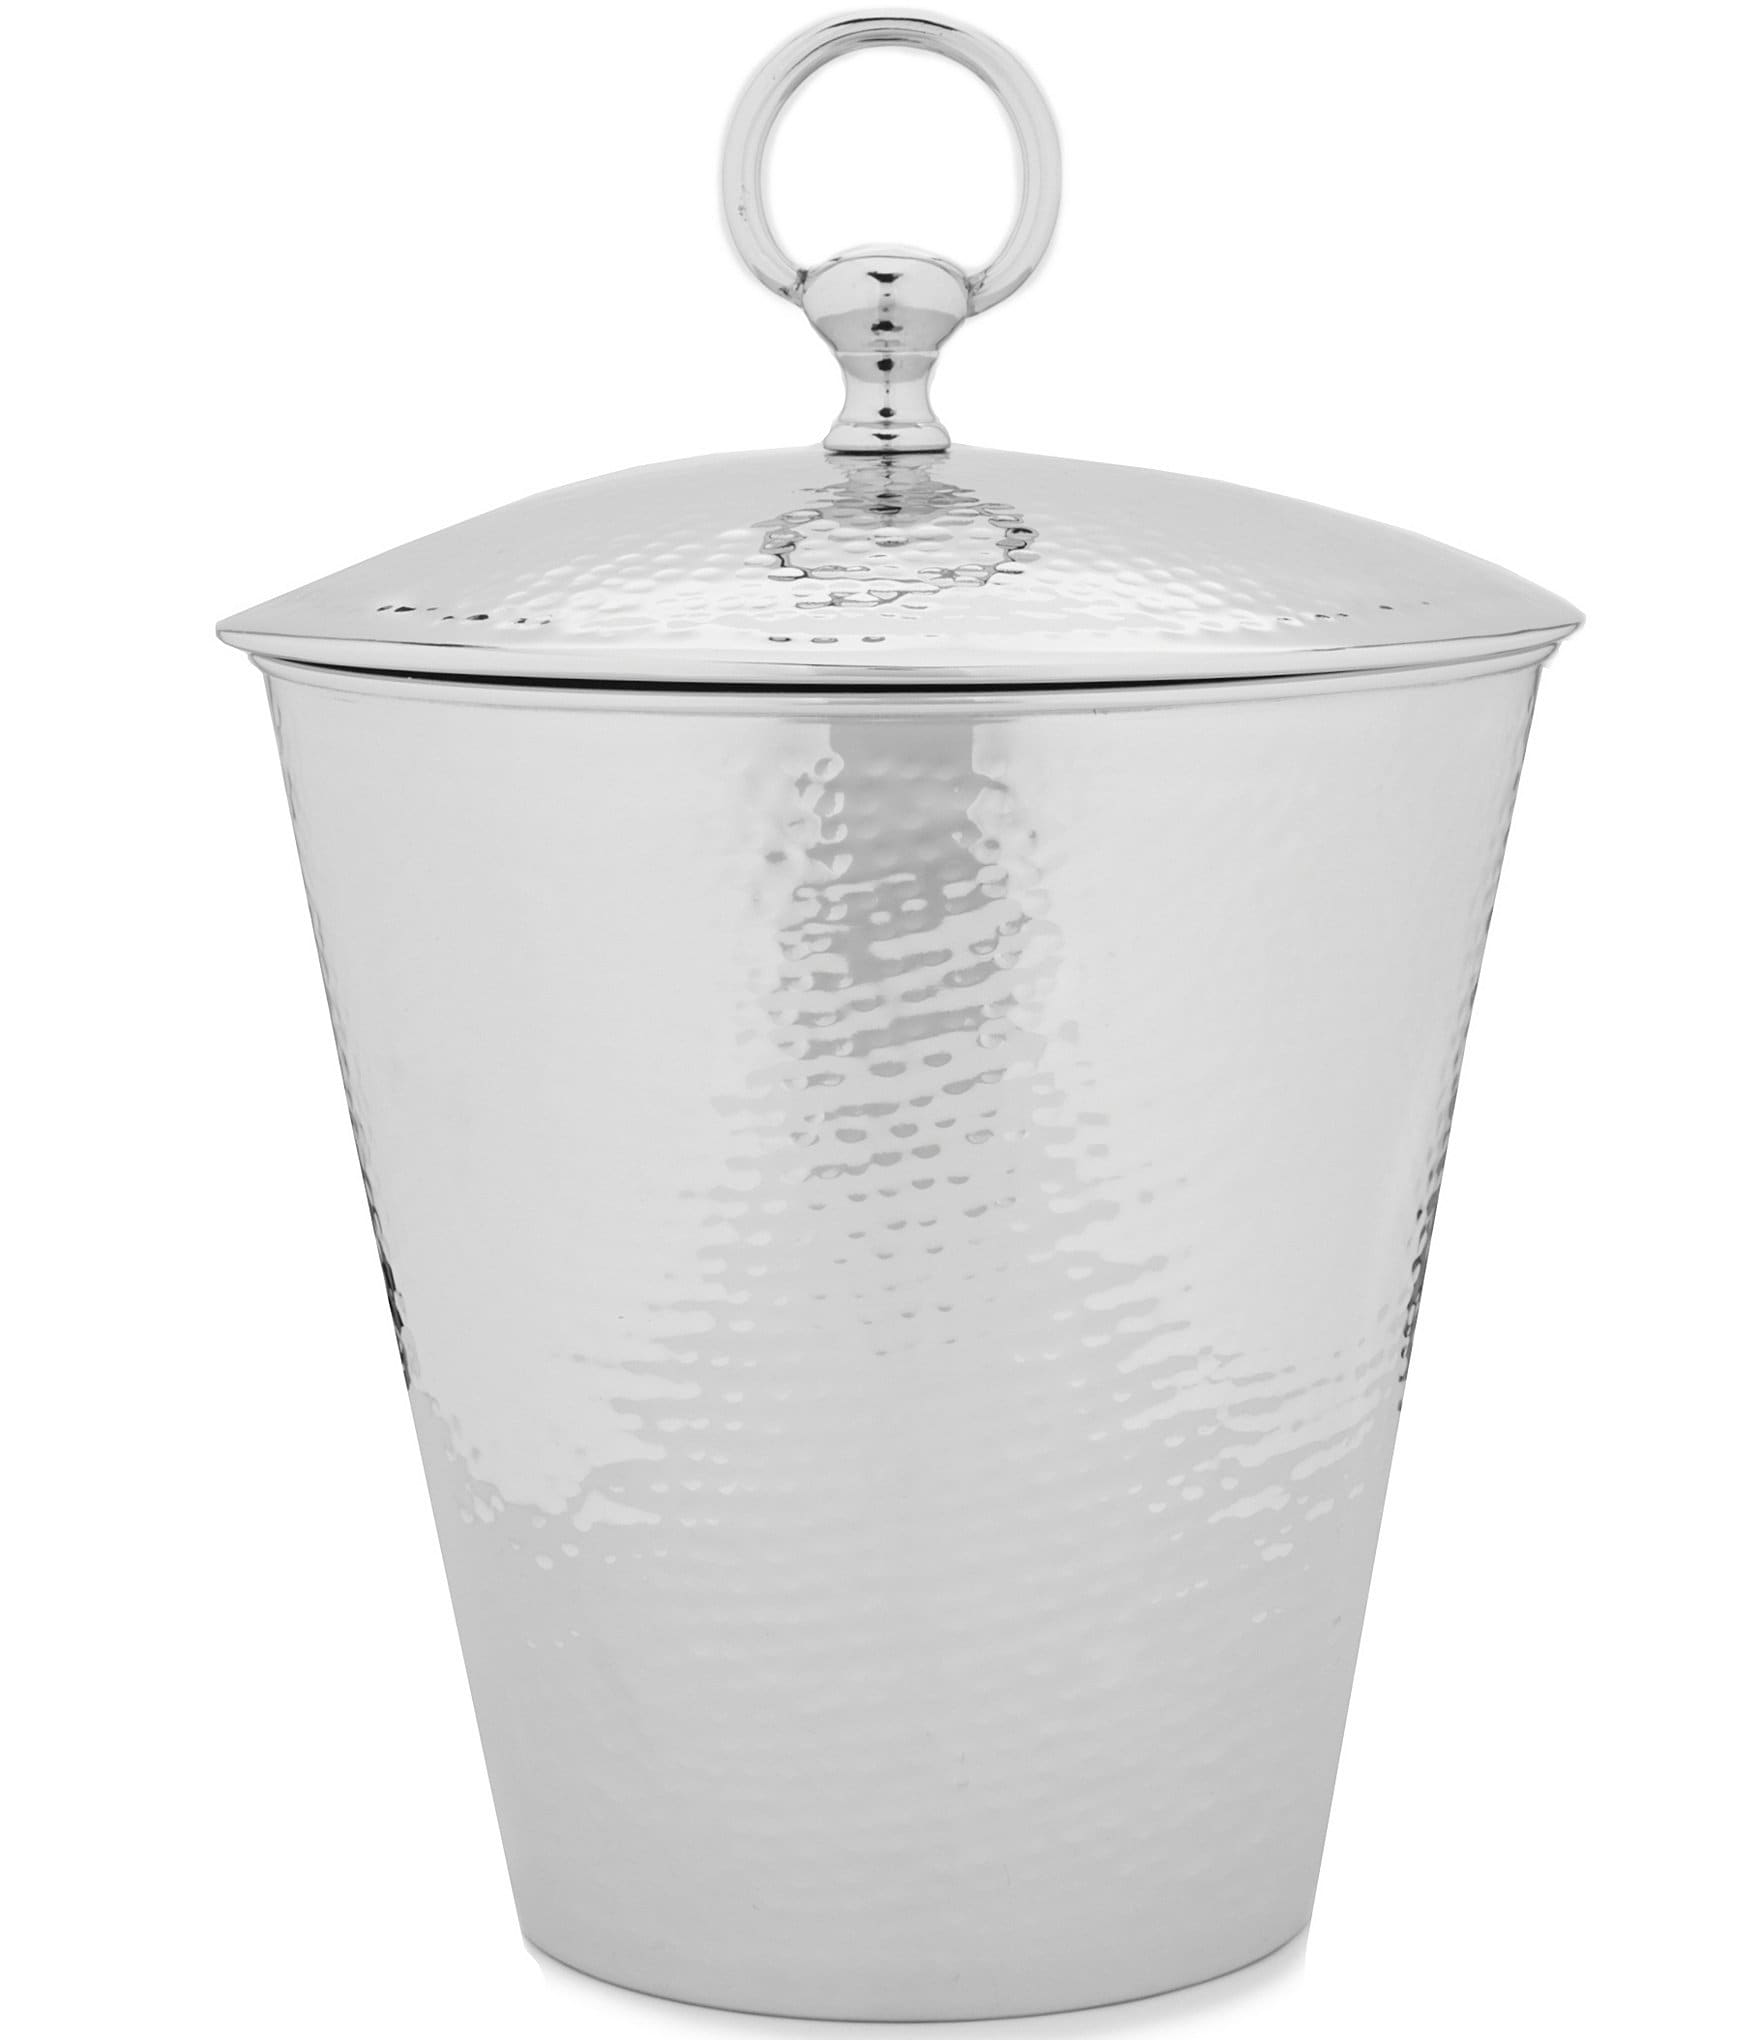 southern-living-hammered-ice-bucket-with-lid-dillard-s